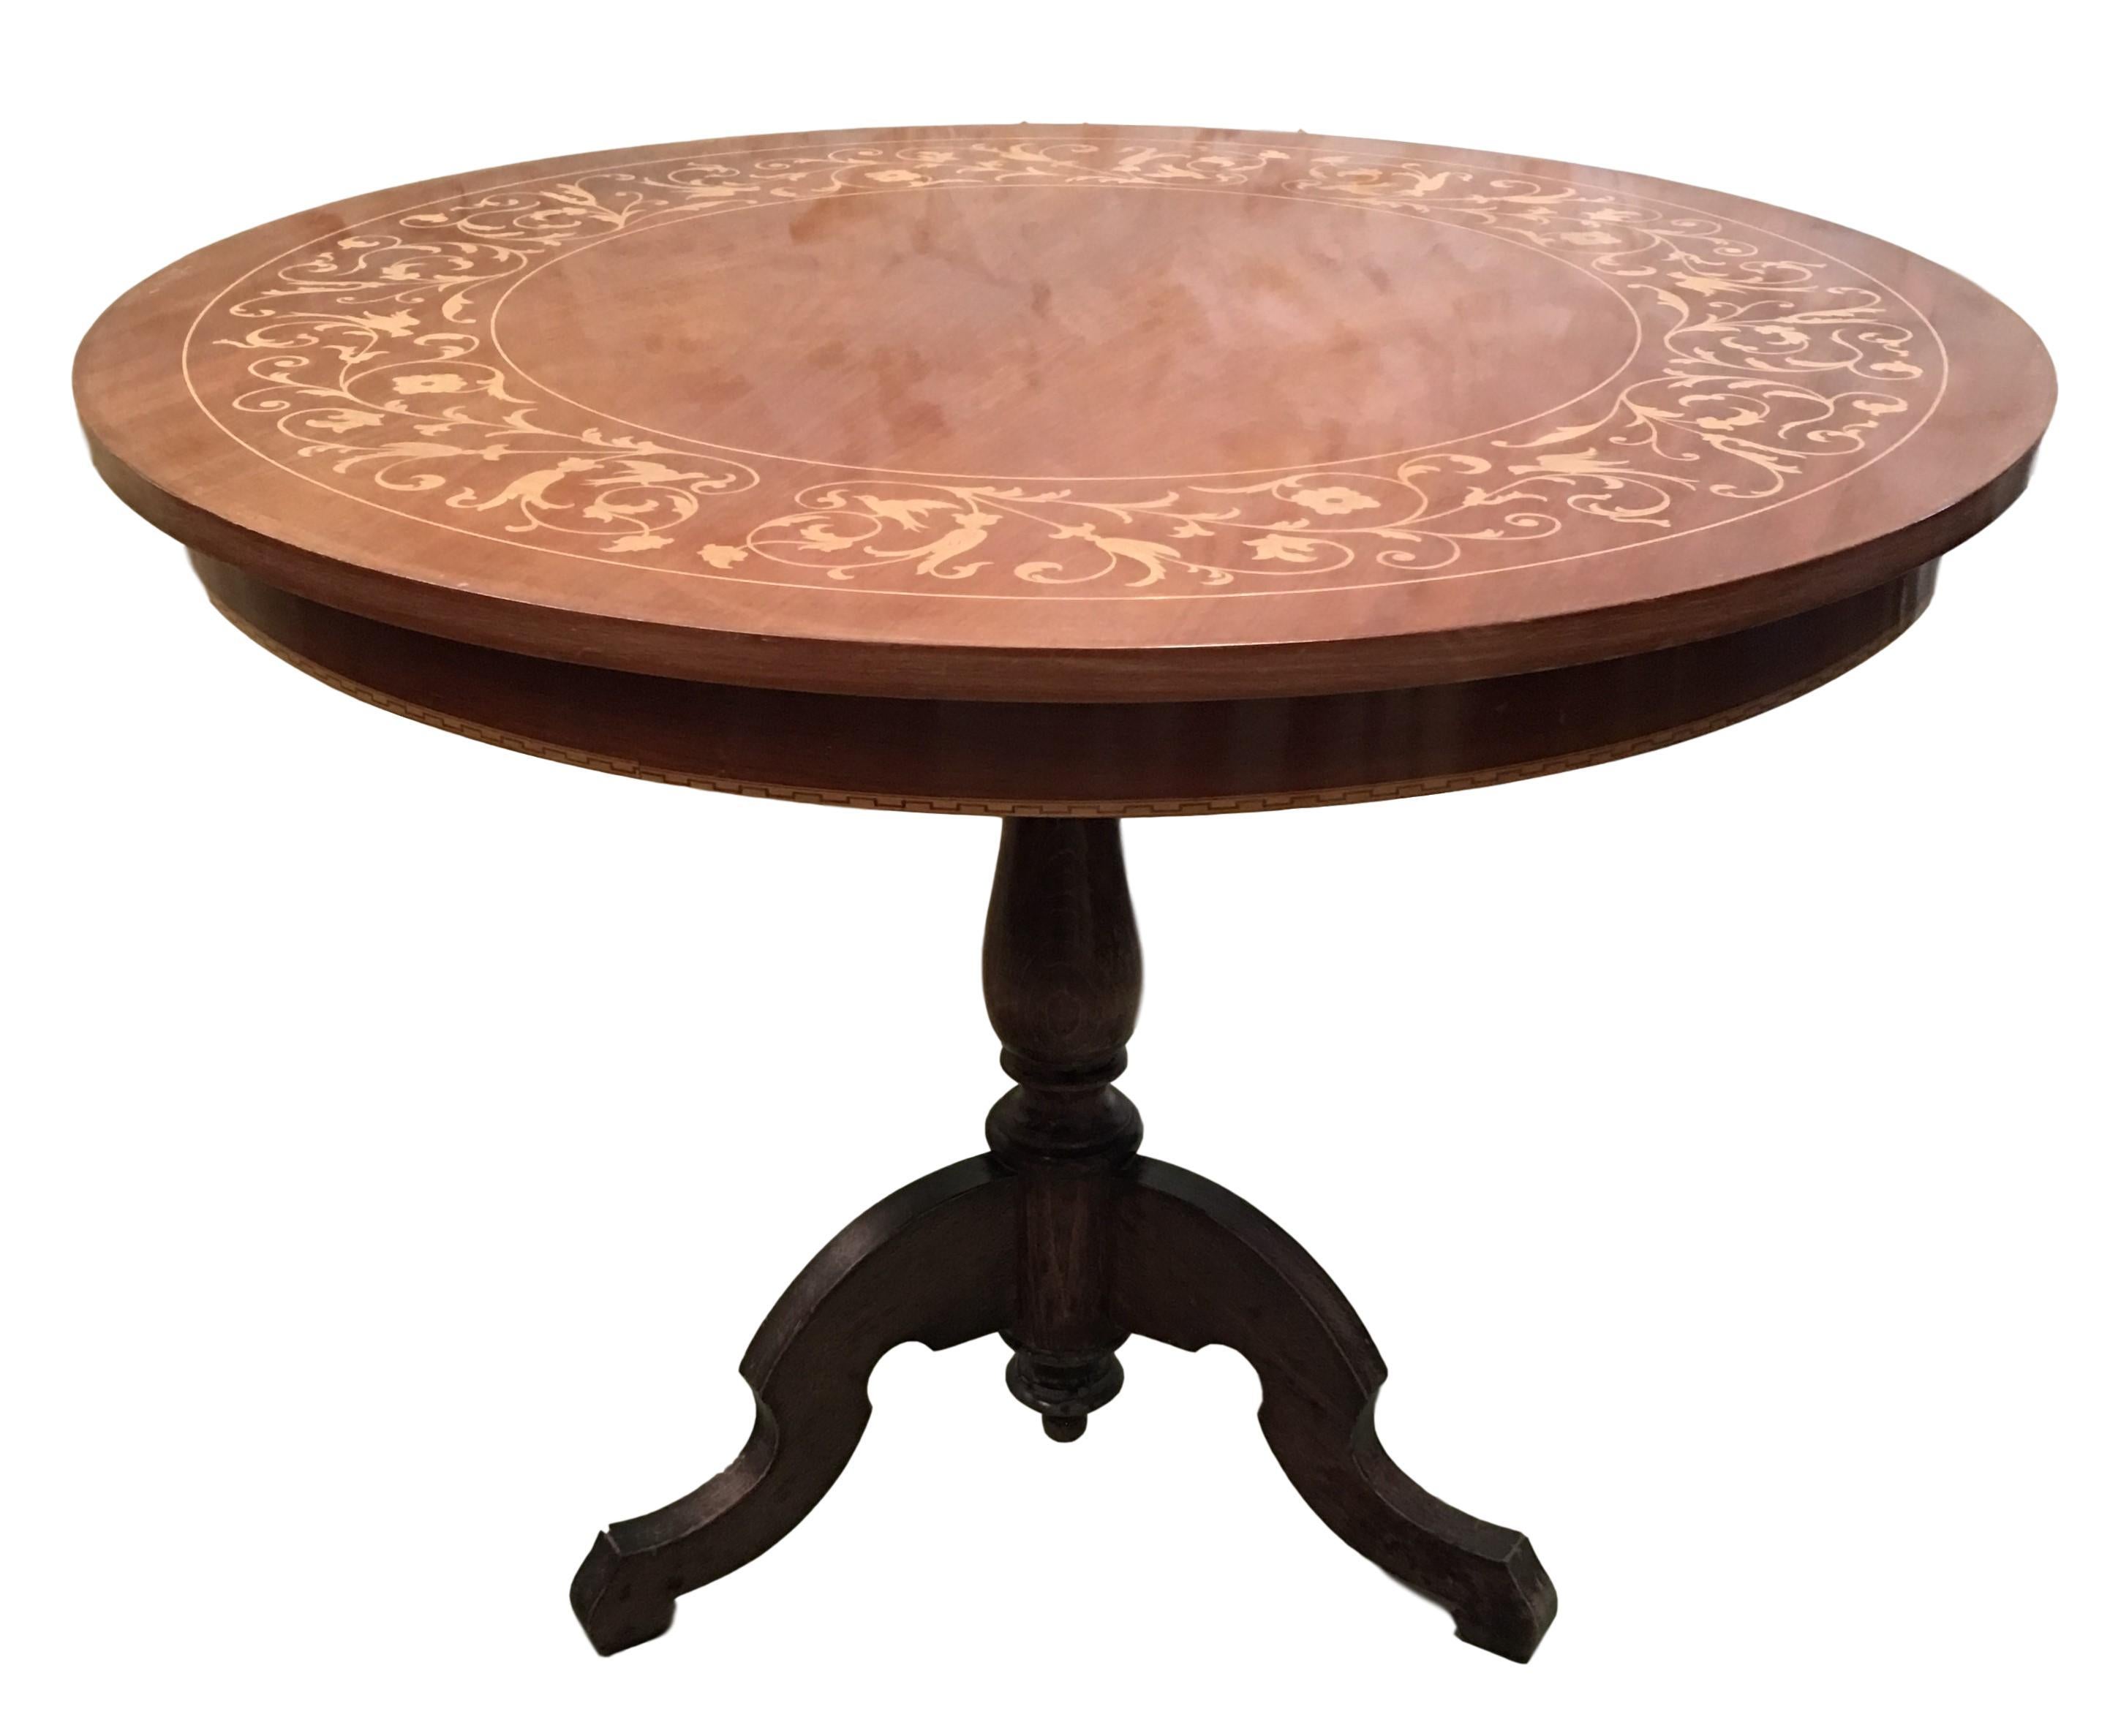 This Italian round pedestal wooden table from the mid to late 19th century features an exquisite floral and birds parquetry motif inlay on the top, surrounded by a sectional motif in the surround. The apron echoes the decorative banding found on the